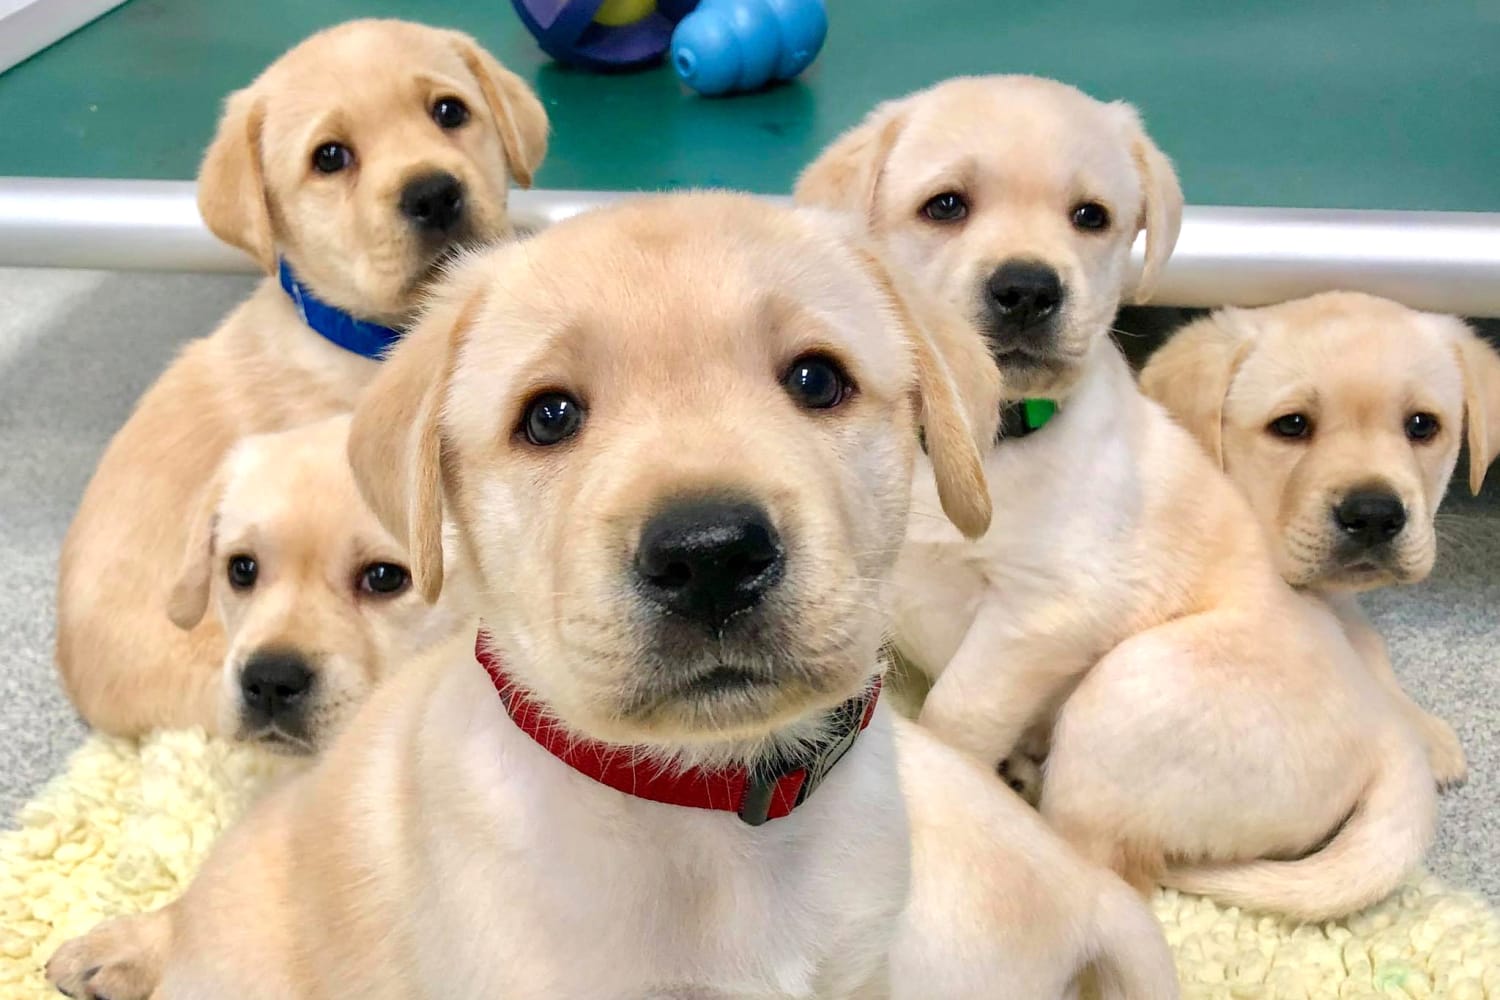 Puppies reach peak cuteness at 8 weeks old according to study